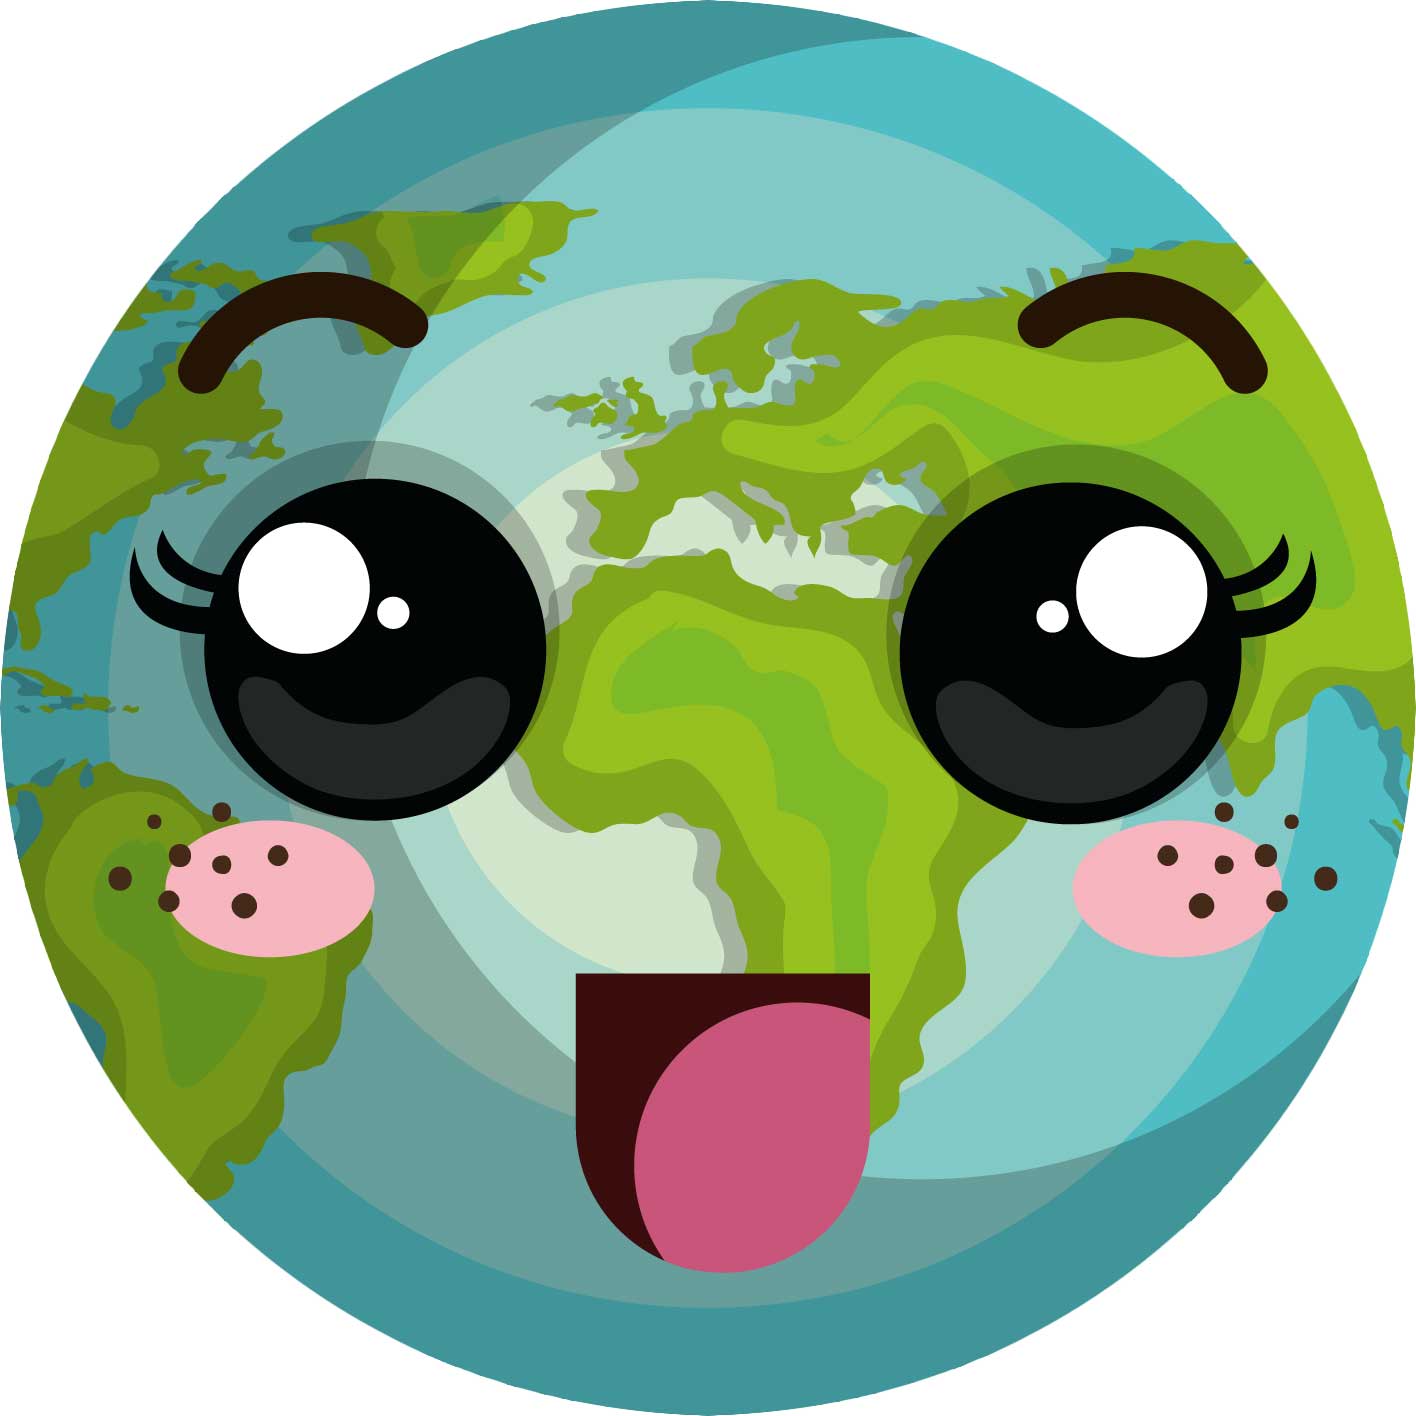 The earth becomes a face – thanks to kawaii.